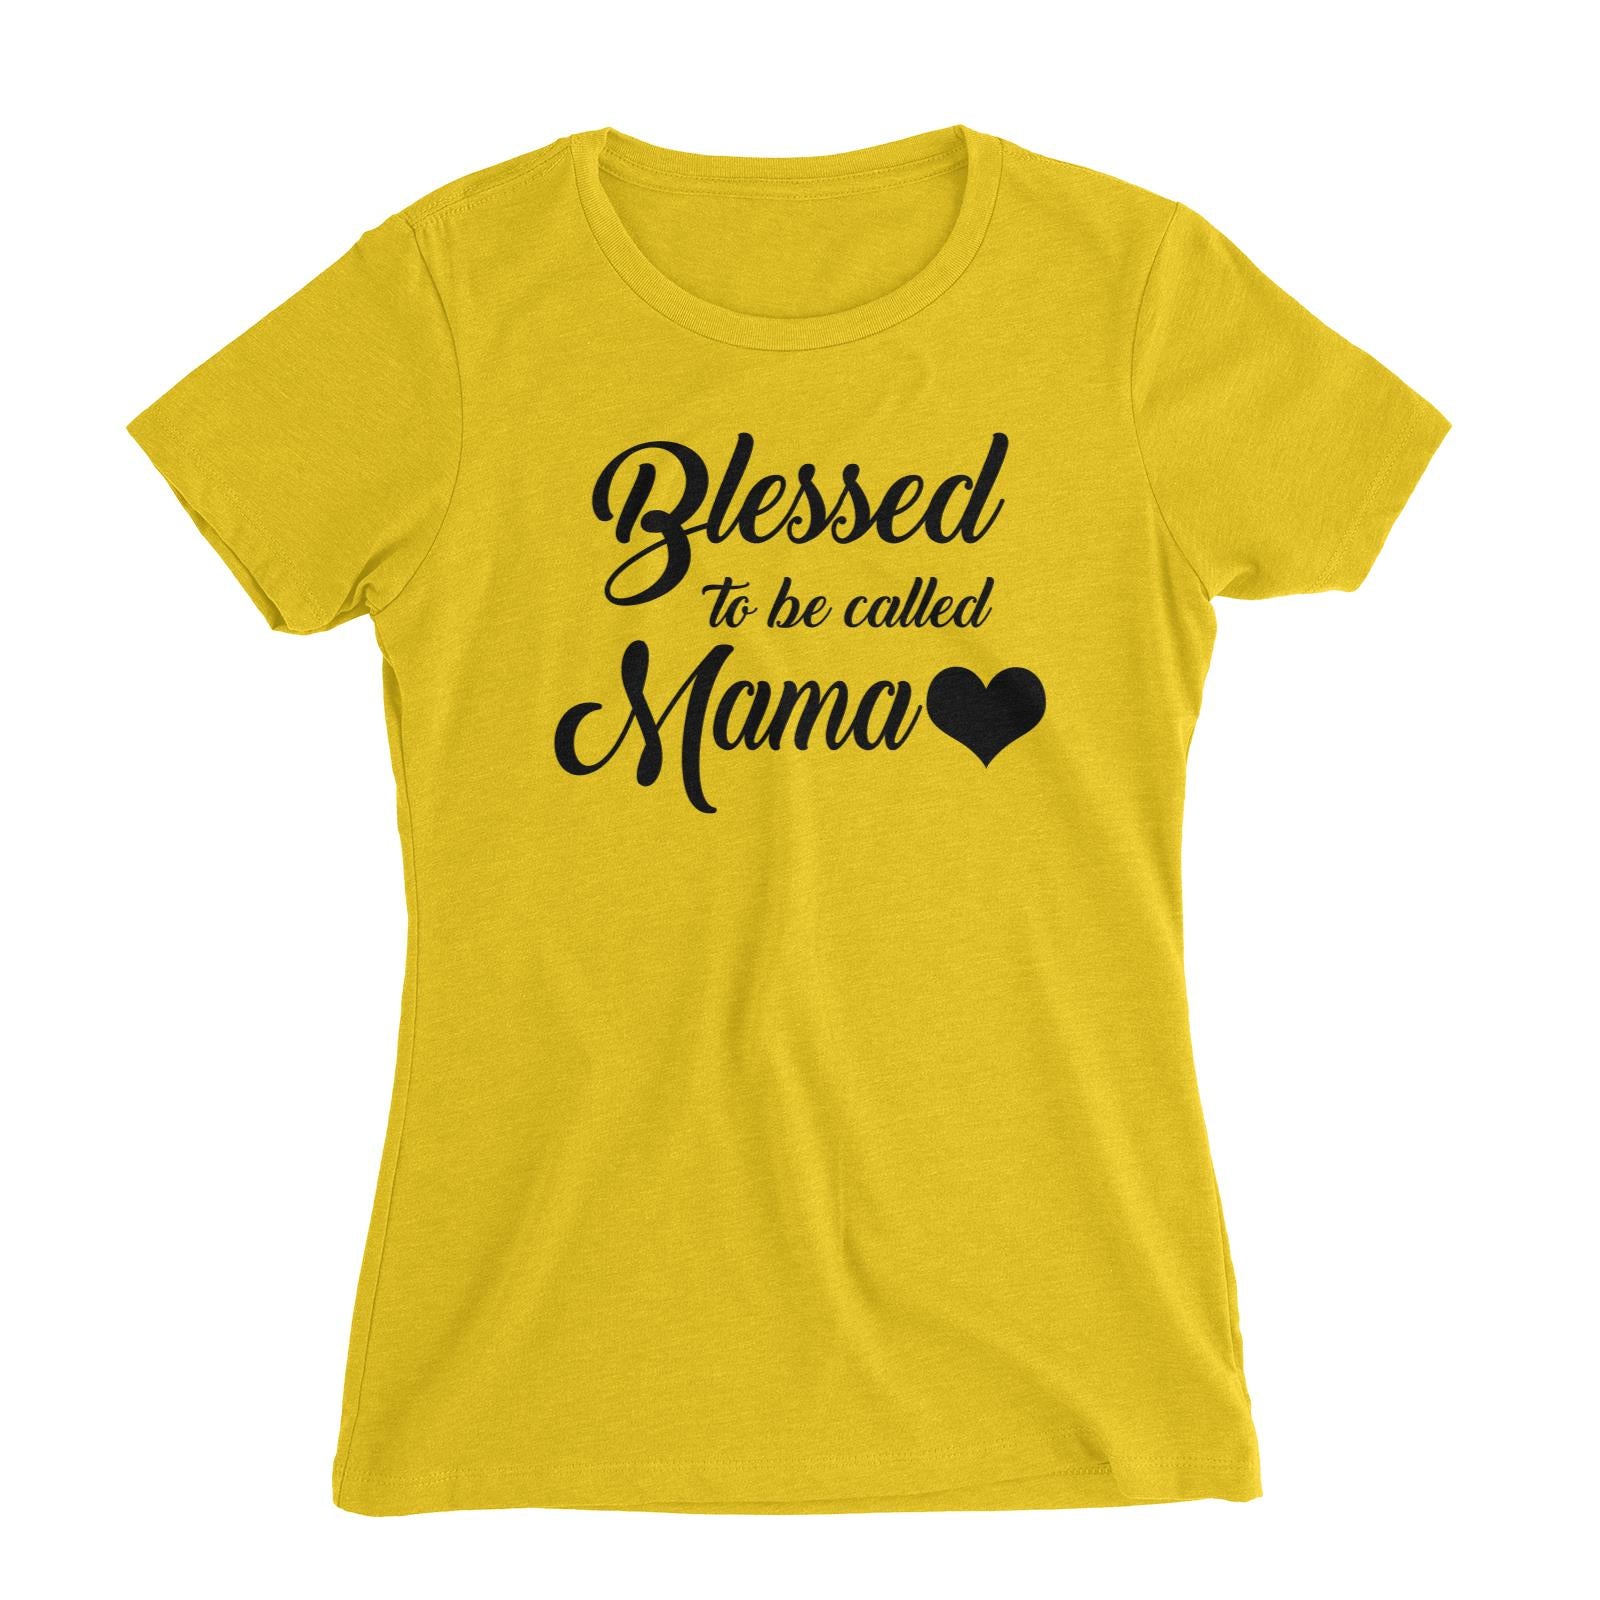 Blessed To Be Called Mama Women's Slim Fit T-Shirt Matching Family Love Blessing